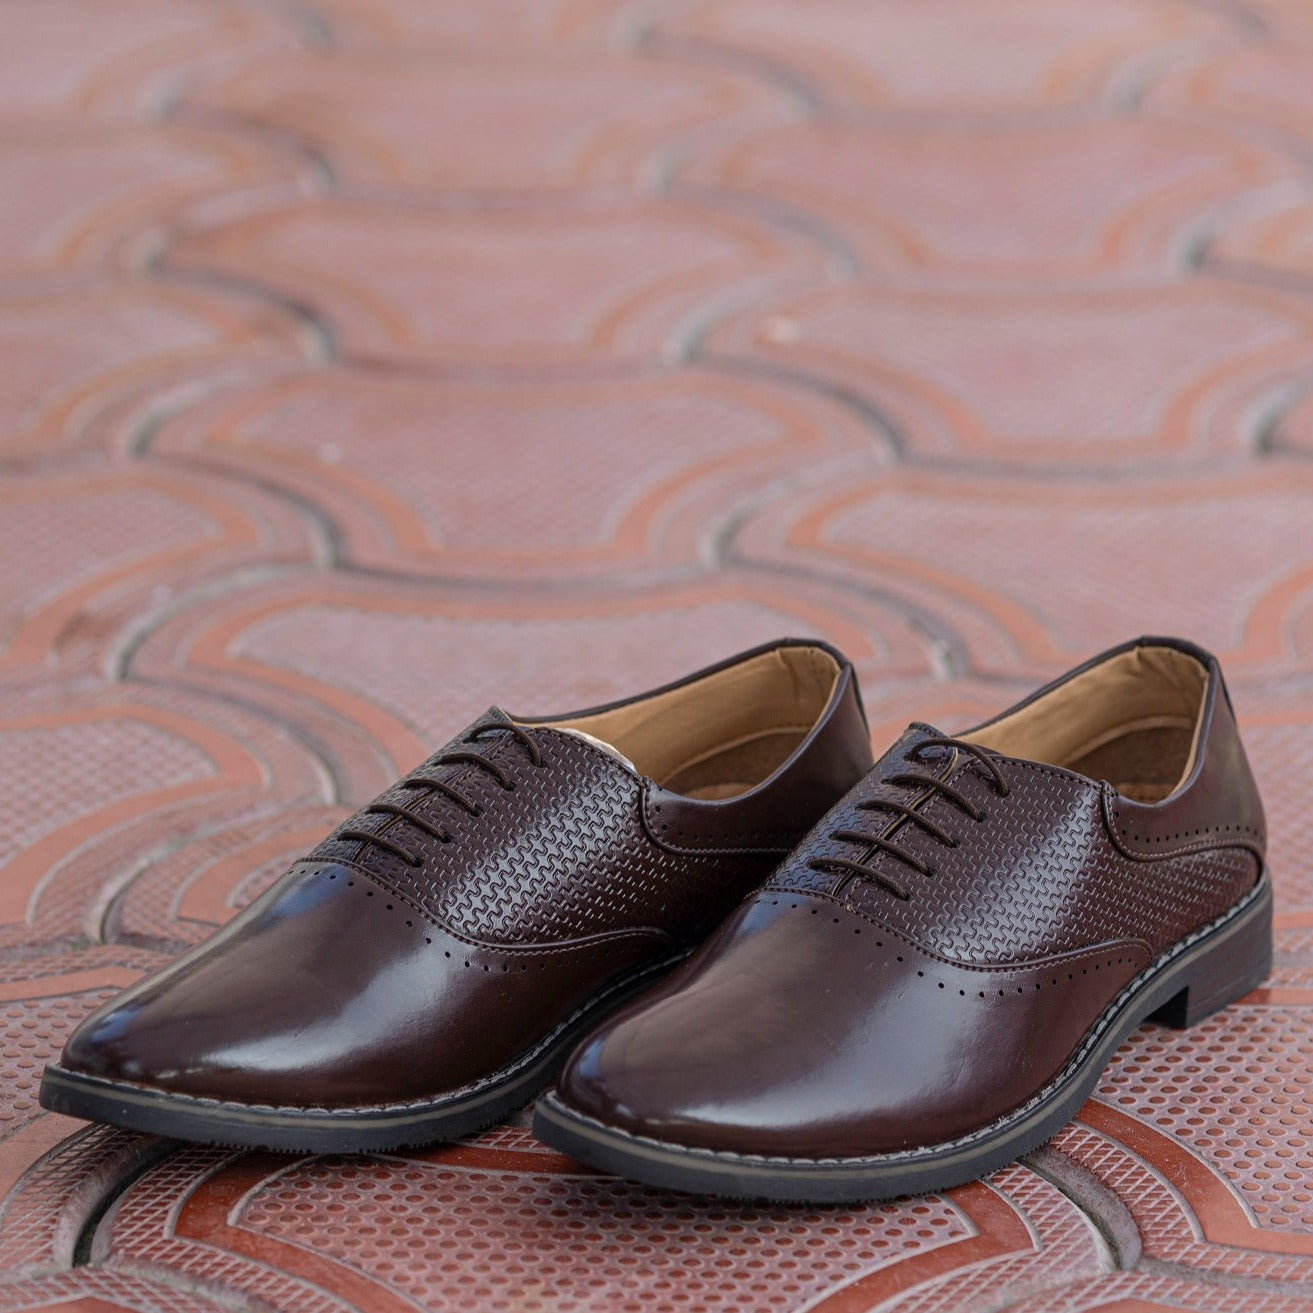 The Aurous Montana Laceup Formal Oxford Shoes